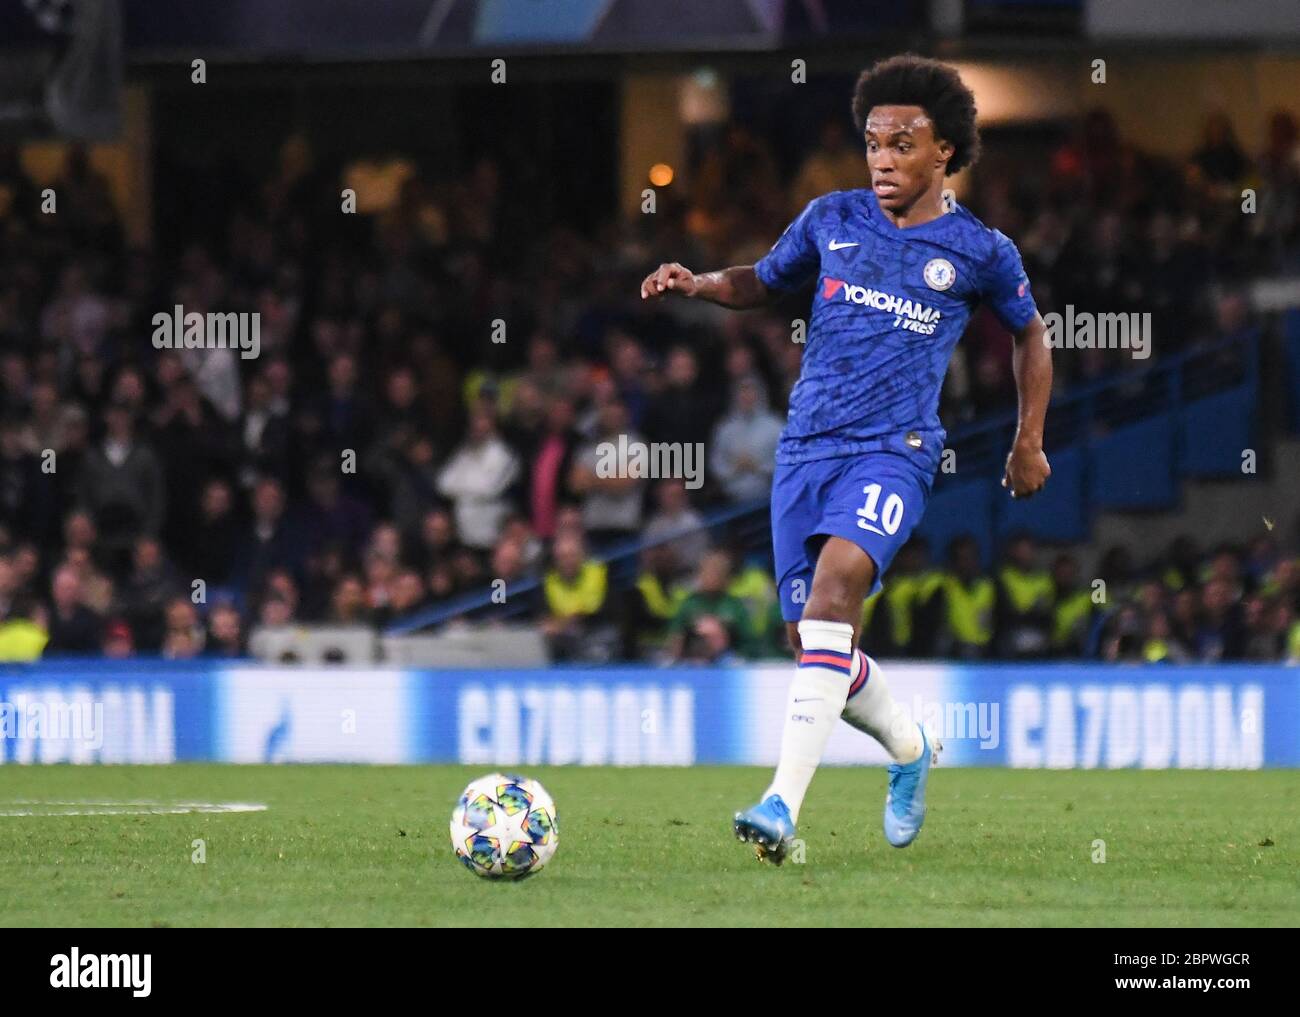 LONDON, ENGLAND - SEPTEMBER 17, 2019: Willian Borges da Silva of Chelsea pictured during the 2019/20 UEFA Champions League Group H game between Chelsea FC (England) and Valencia CF (Spain) at Stamford Bridge. Stock Photo